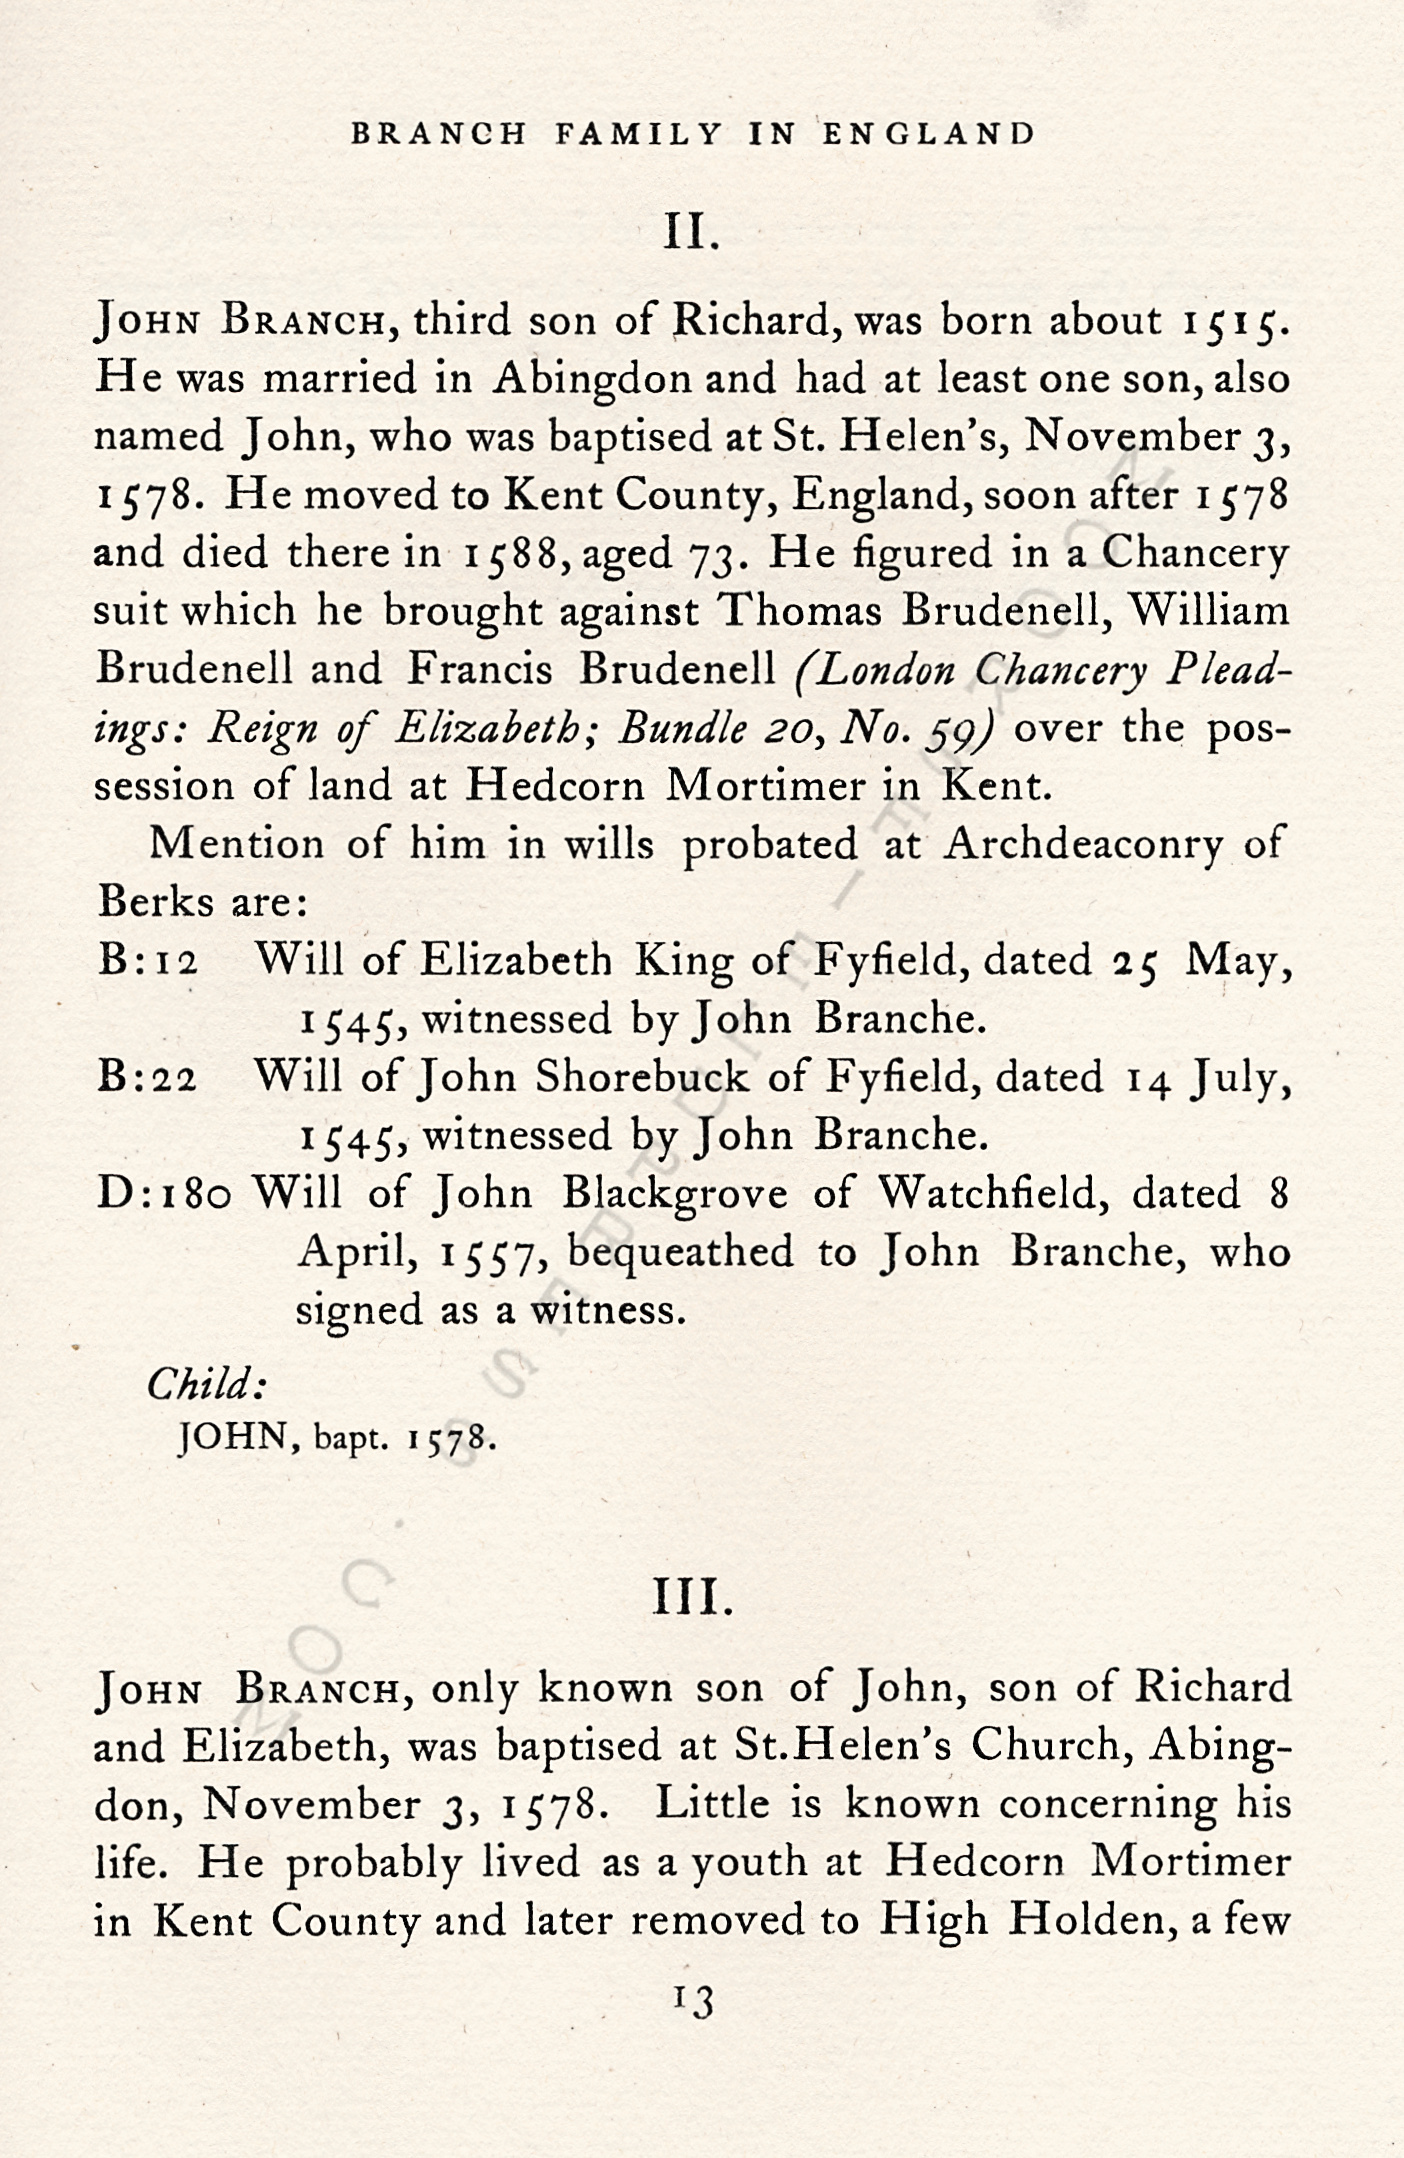 The Branch
                      Family of New England, The Line of William Farrand
                      Branch